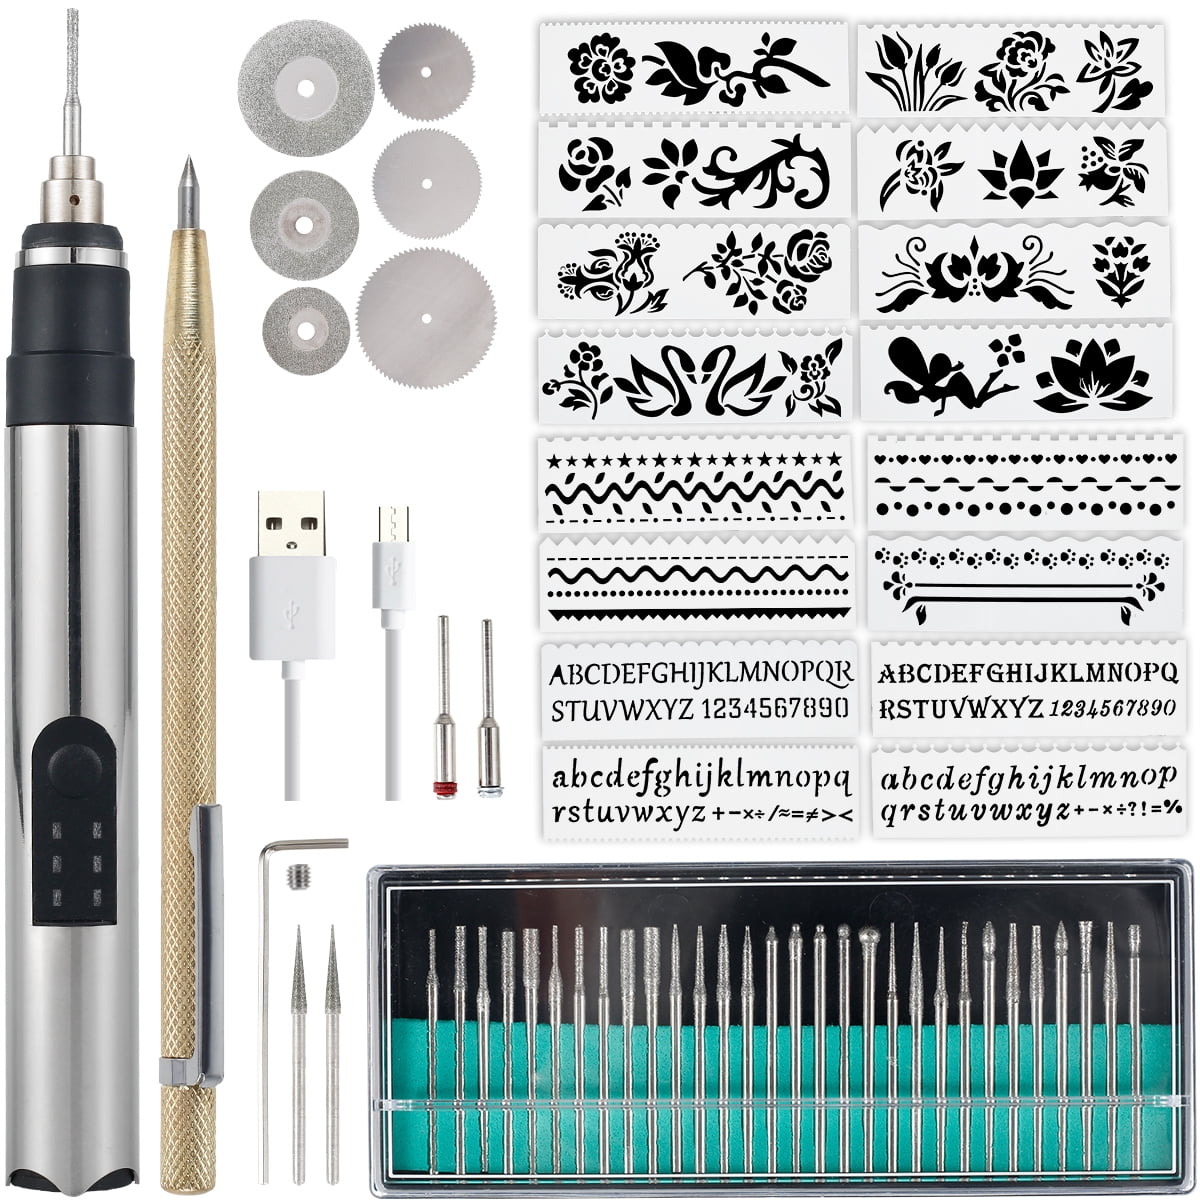 Hobby Craft Engraving Pen for Personalized Metal Glass and Wood Crafts